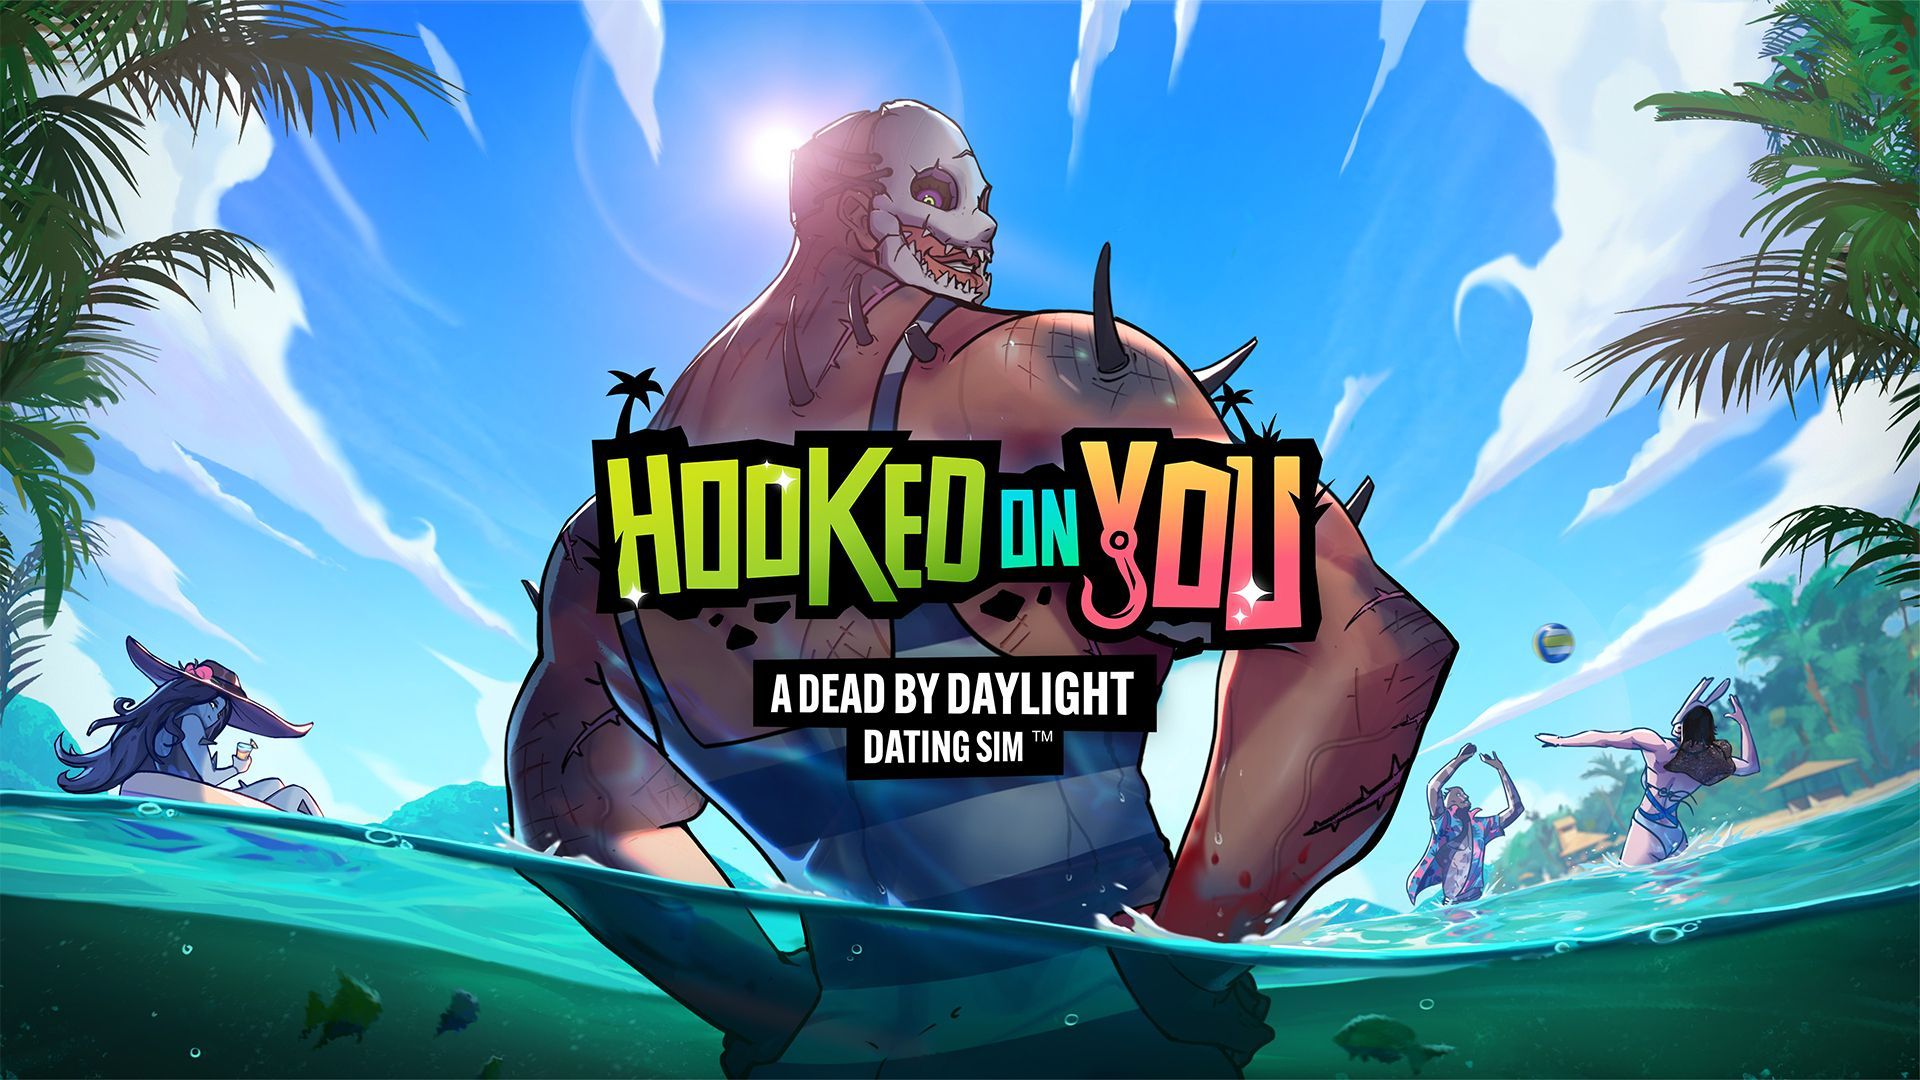 Dead by Daylight Gets Tropical with the Hooked on You Collection